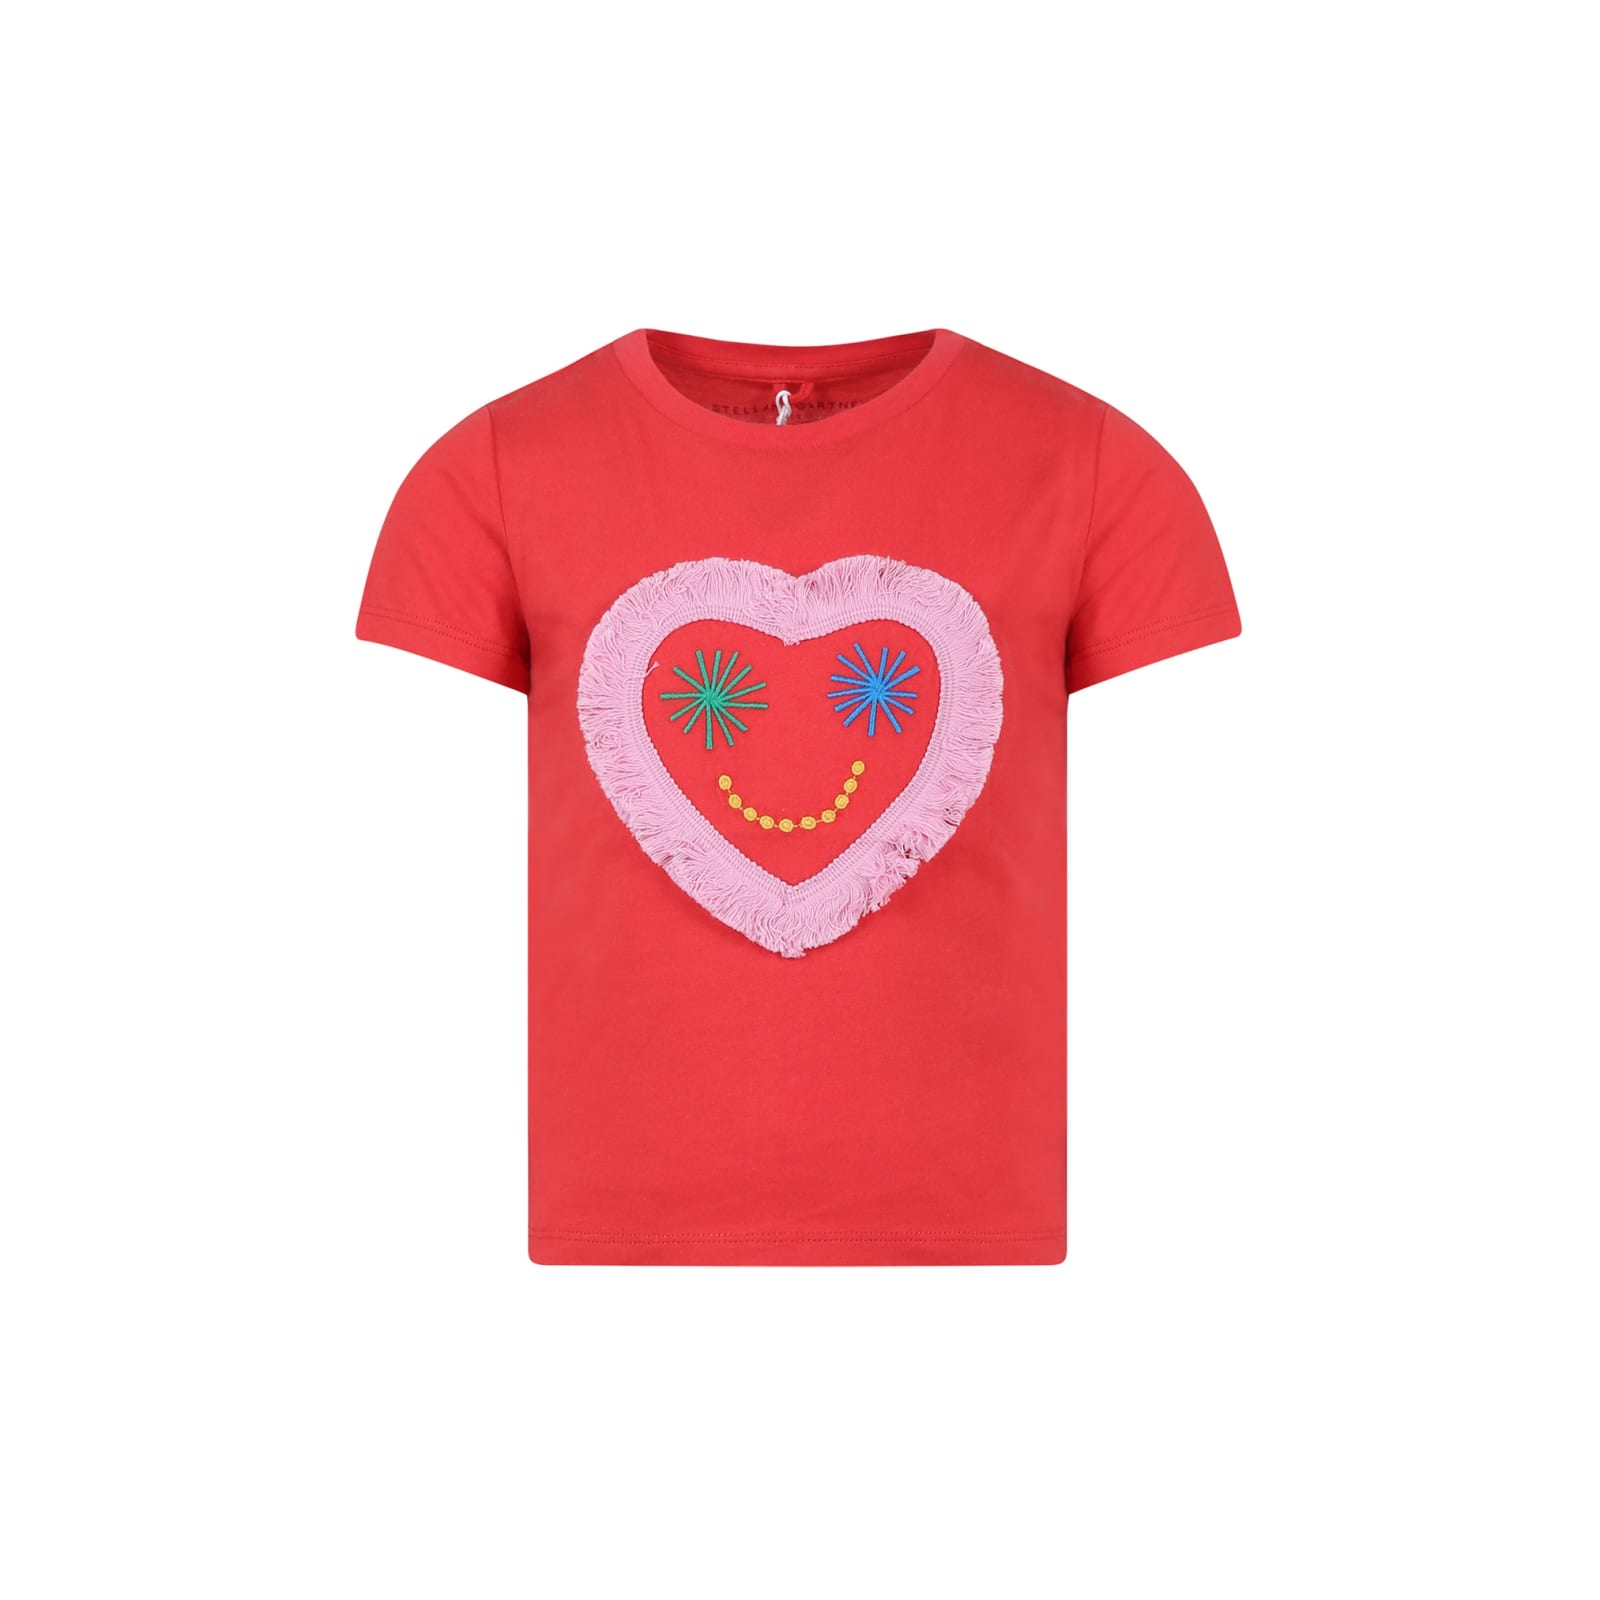 STELLA MCCARTNEY RED T-SHIRT FOR GIRL WITH HEART